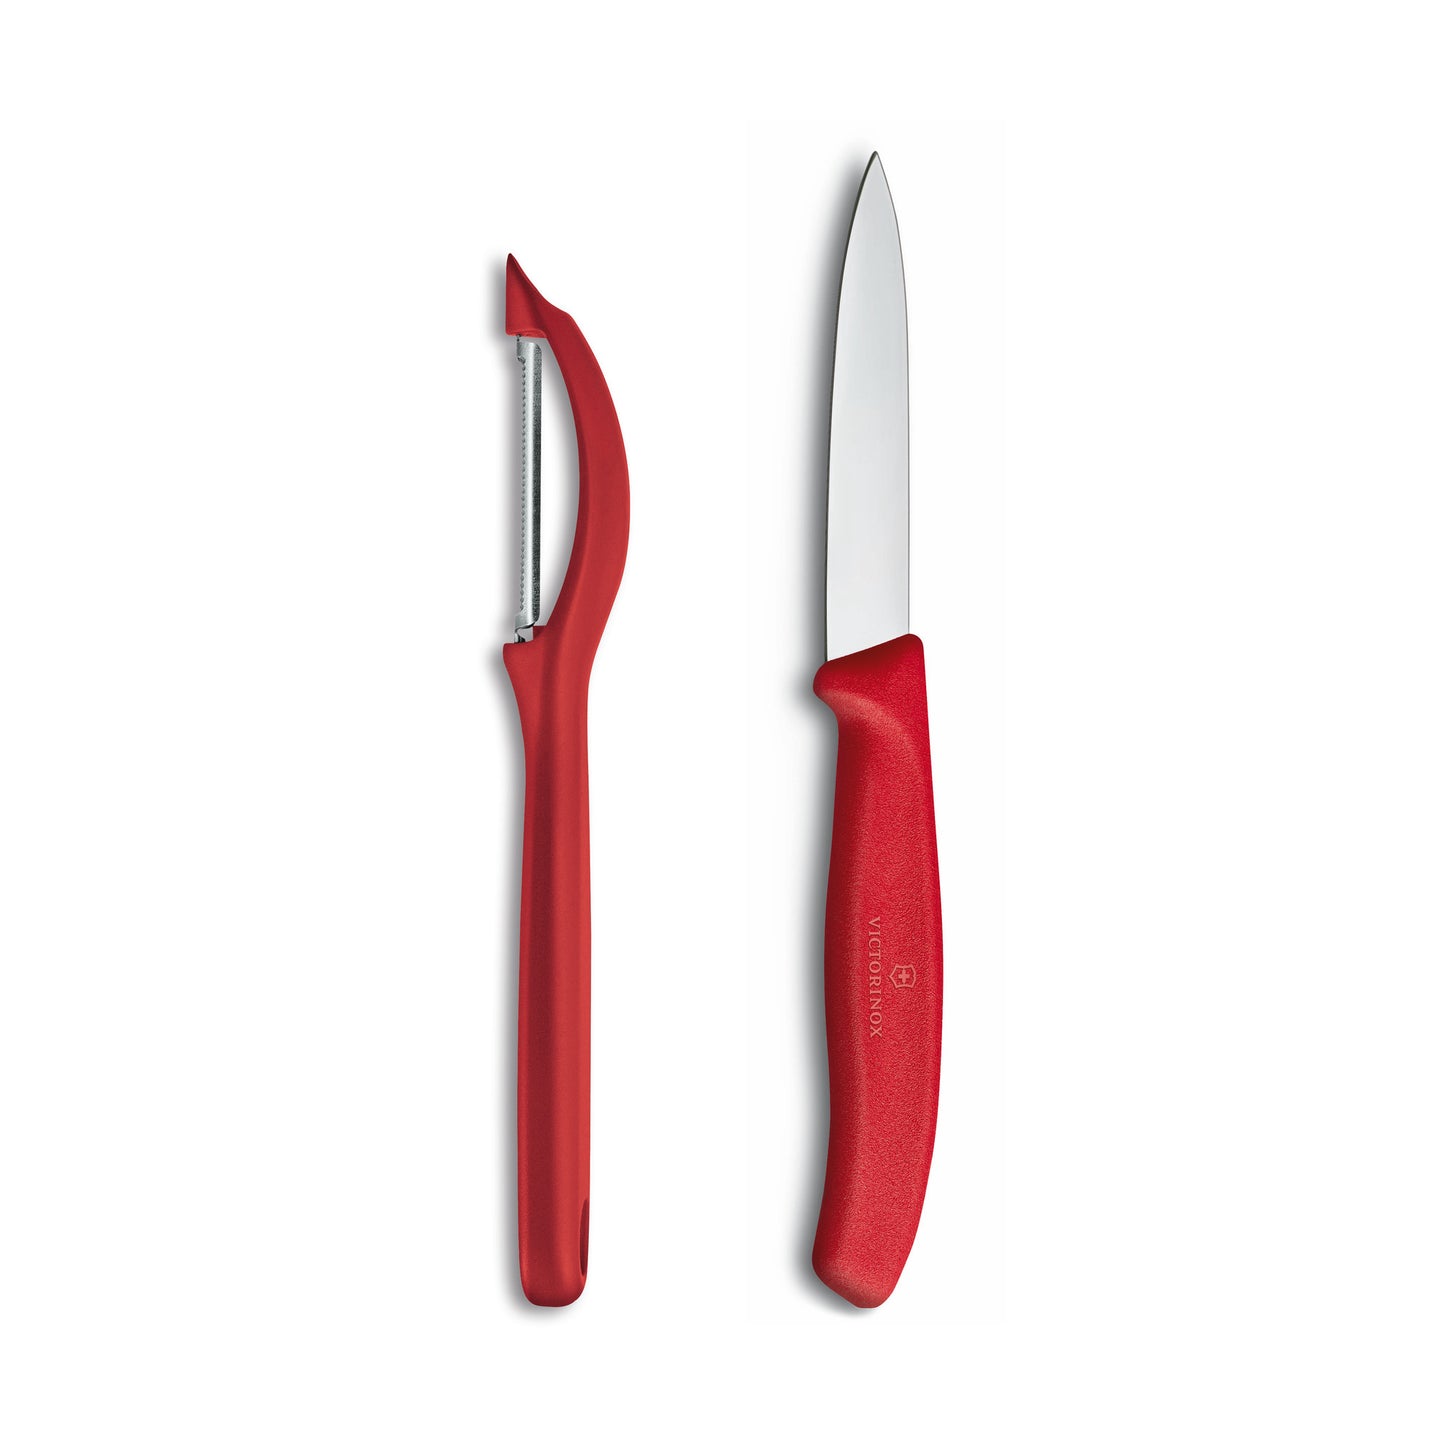 Swiss Classic Peeling and Paring Knife Combo